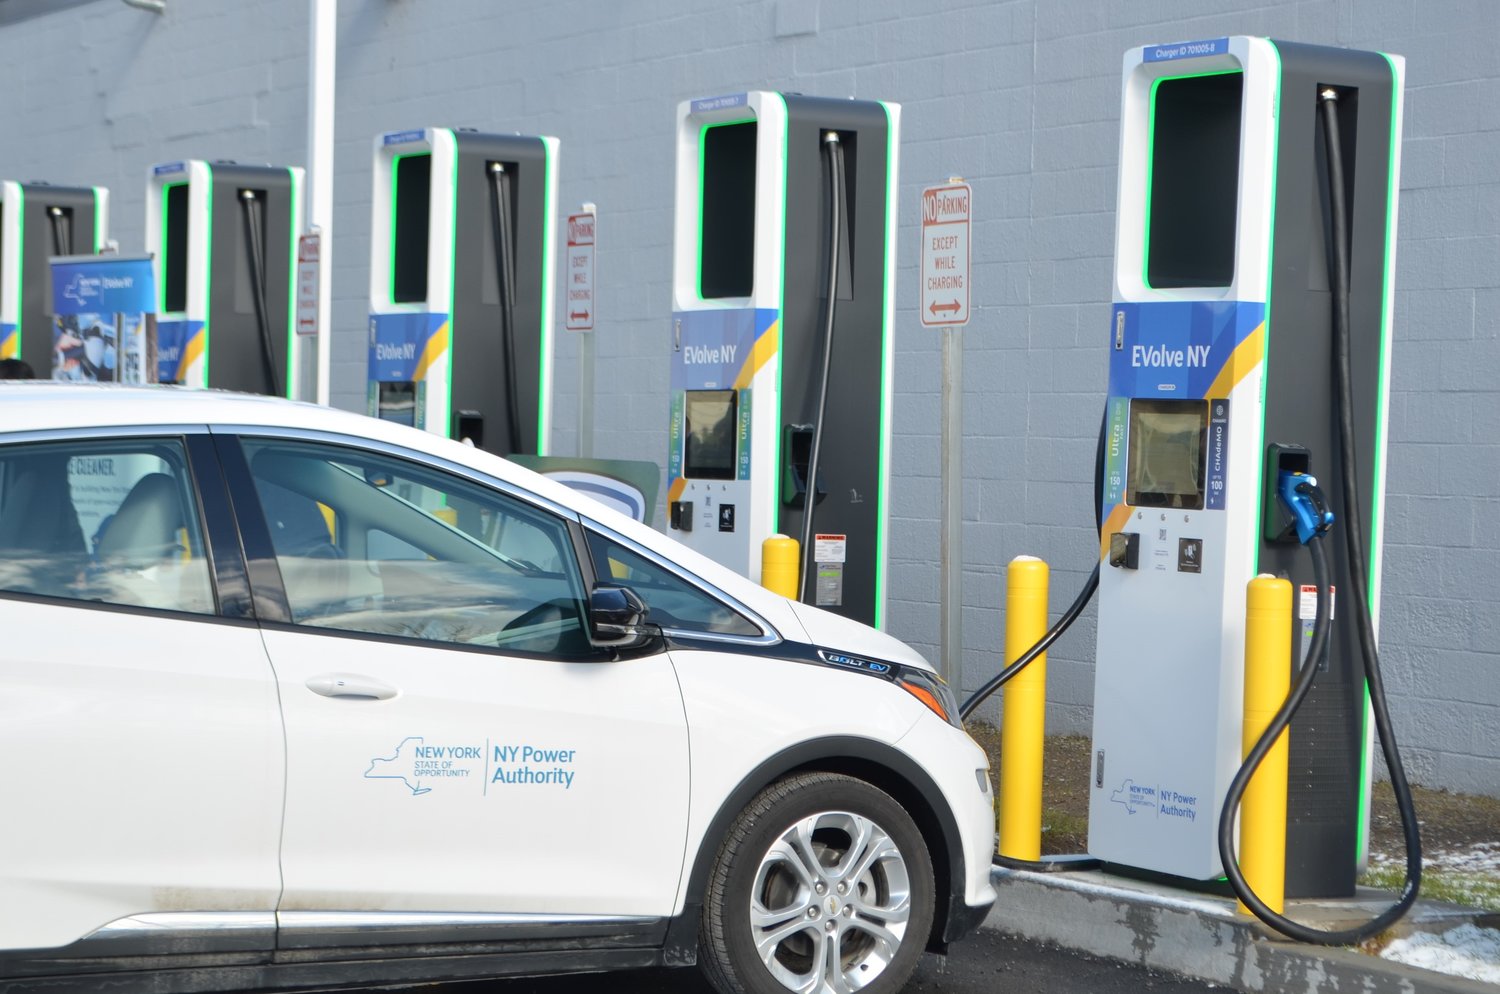 An electric vehicle with New York Power Authority (NYPA) livery sits ready at one of Hancock's new EVolve NY charging stations.